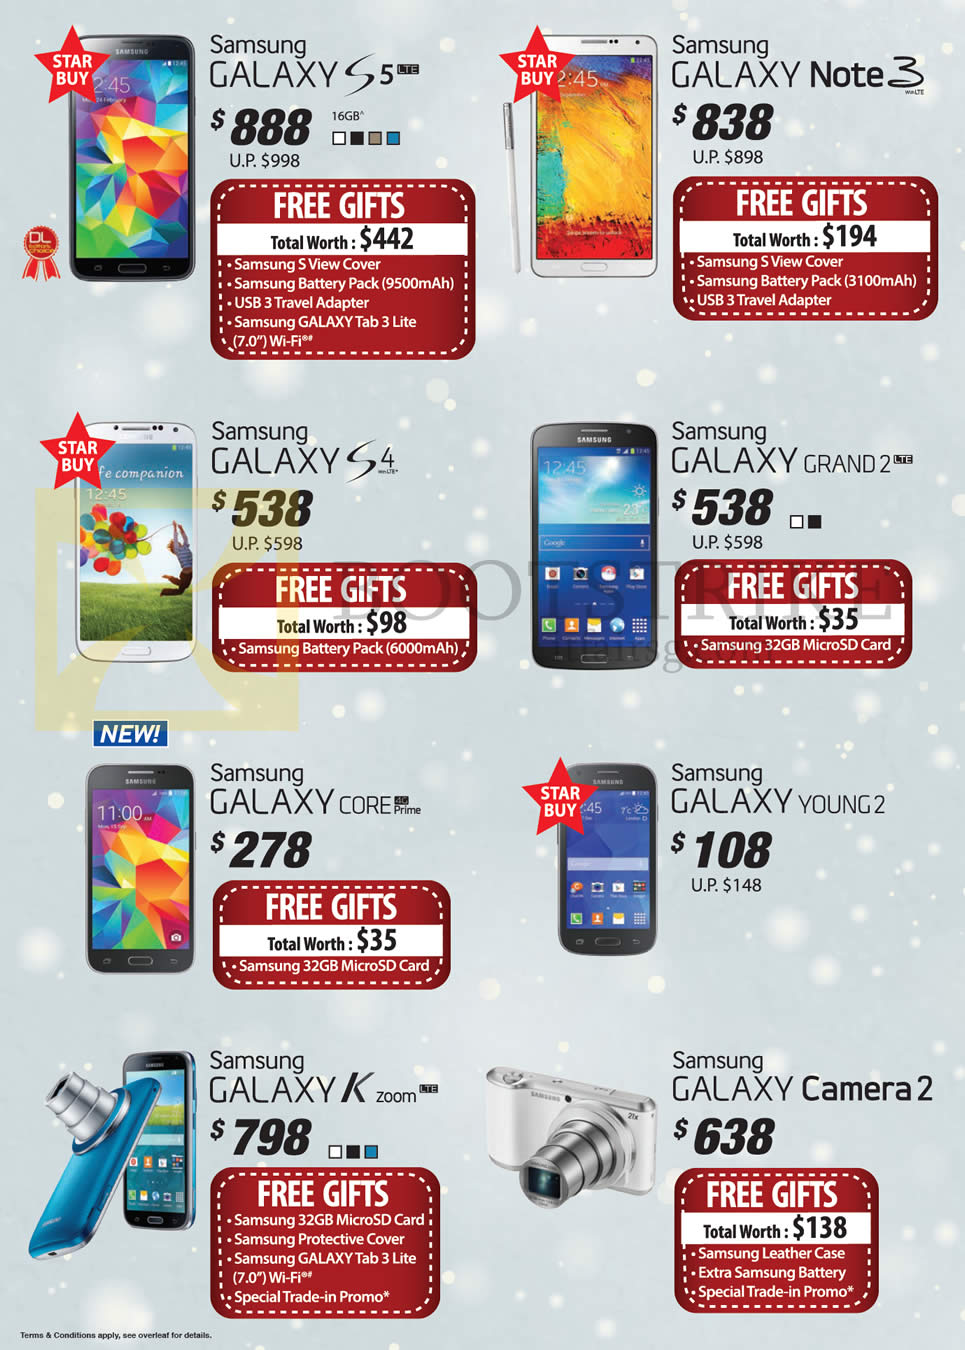 SITEX 2014 price list image brochure of Samsung Smartphones Galaxy S5, Note 3, S4, Grand 2, Core, Young 2, K Zoom, Camera 2